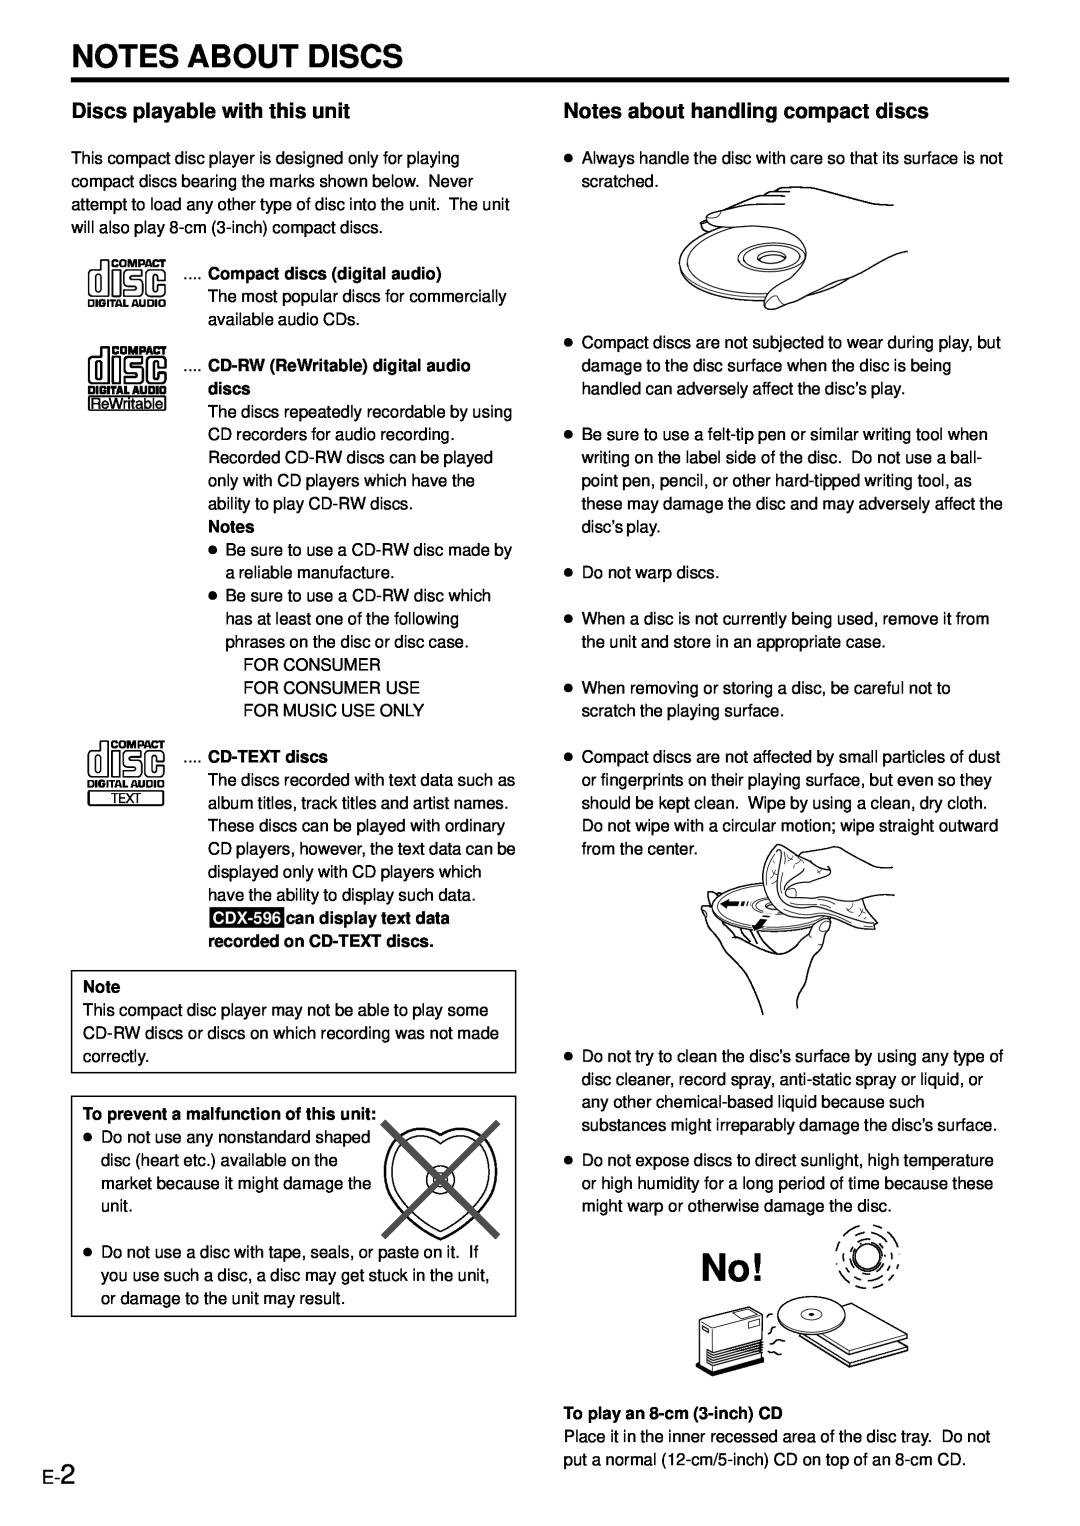 Yamaha CDX-396, CDX-496 owner manual Notes About Discs 